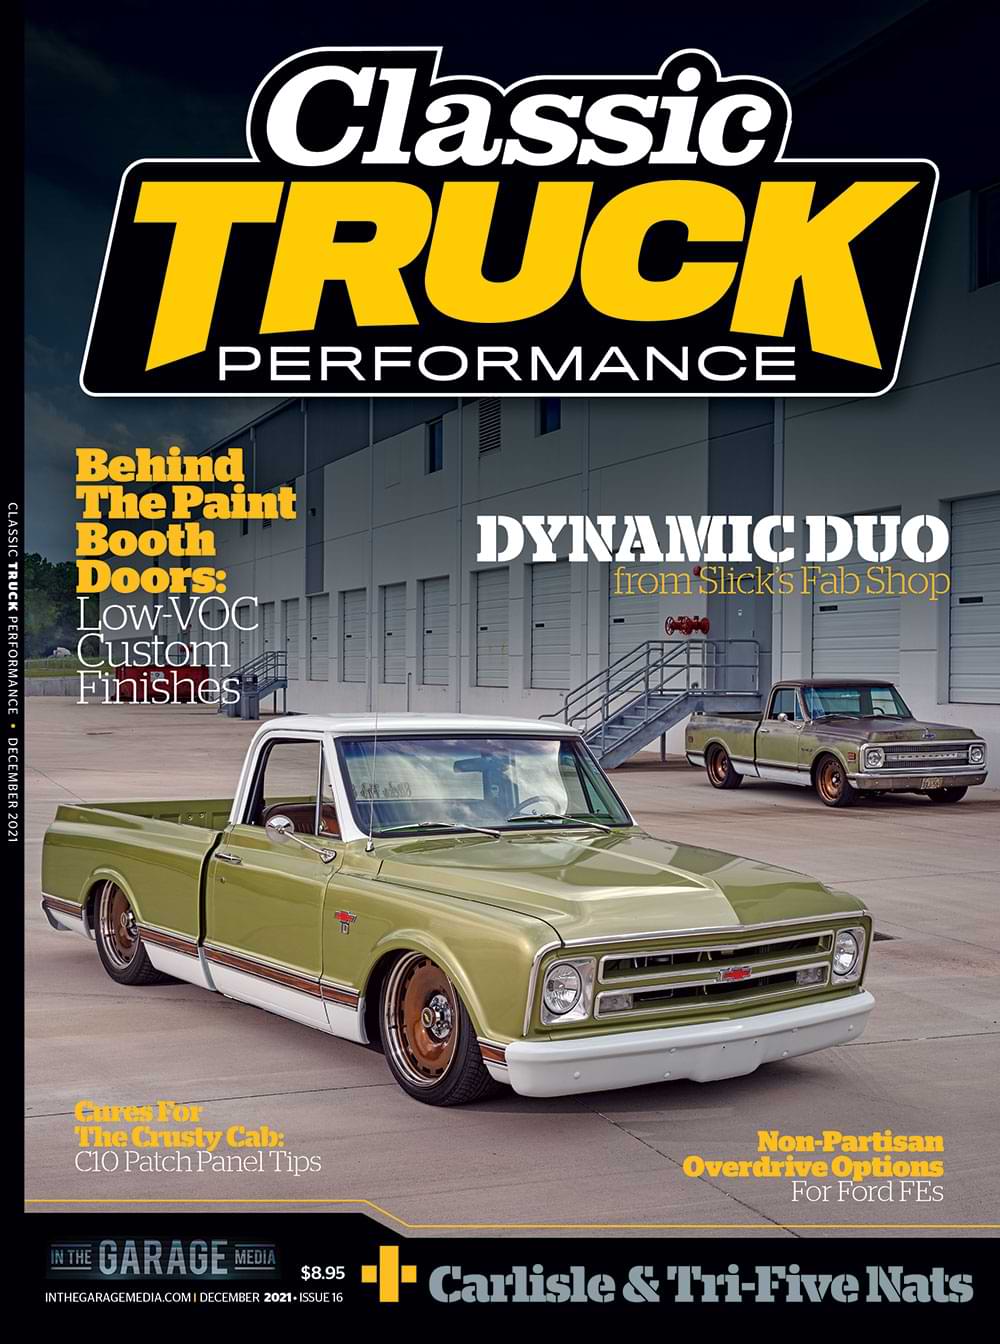 December 2021 edition cover of Classic Truck Performance Magazine